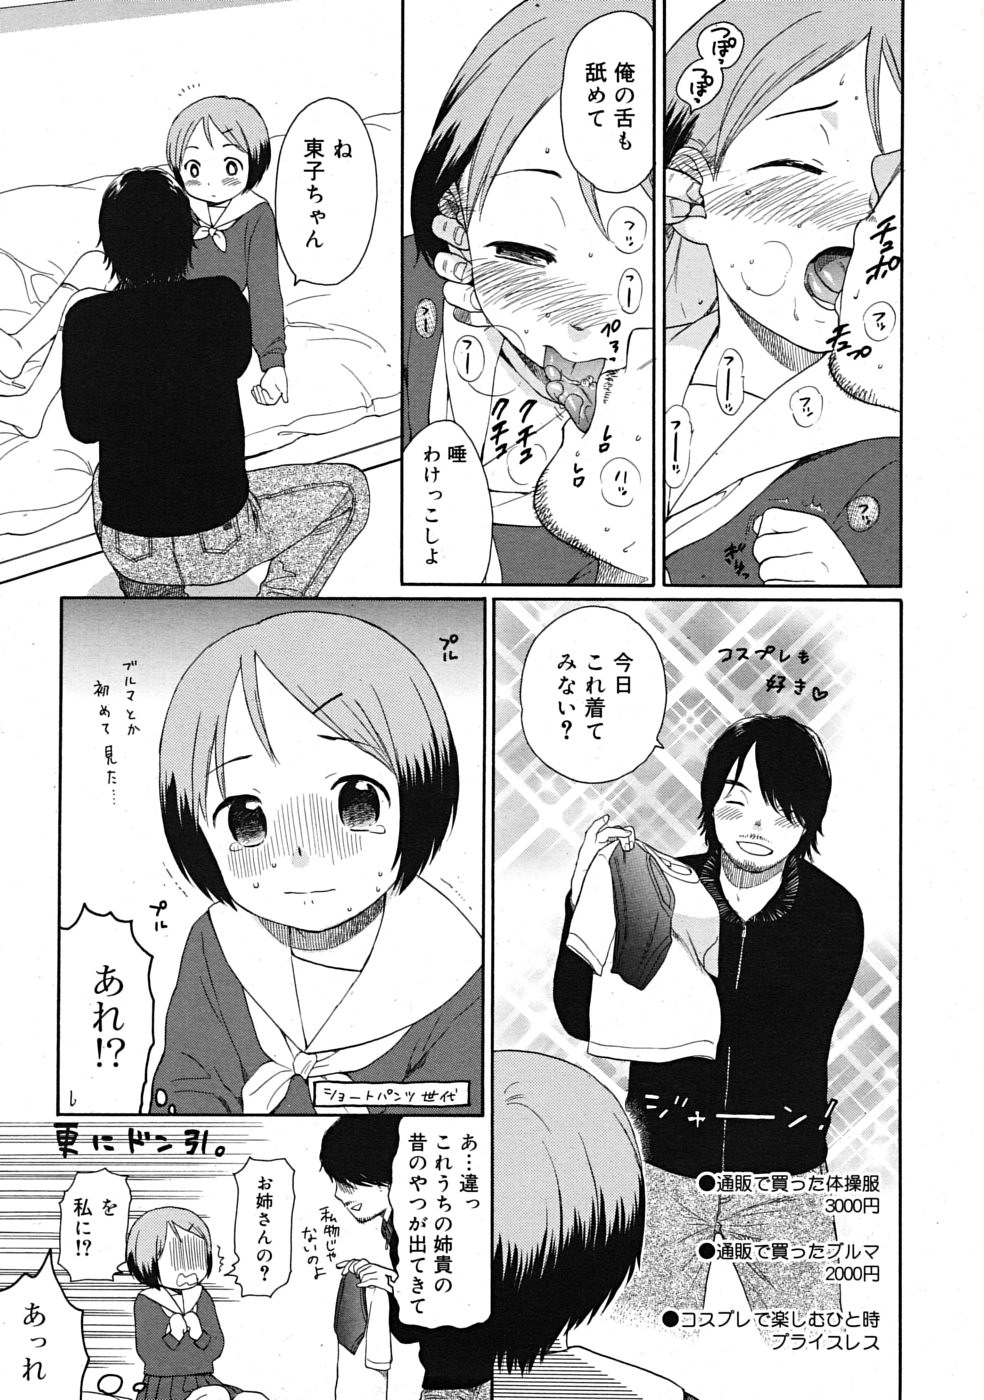 Comic RiN [2009-09] page 33 full